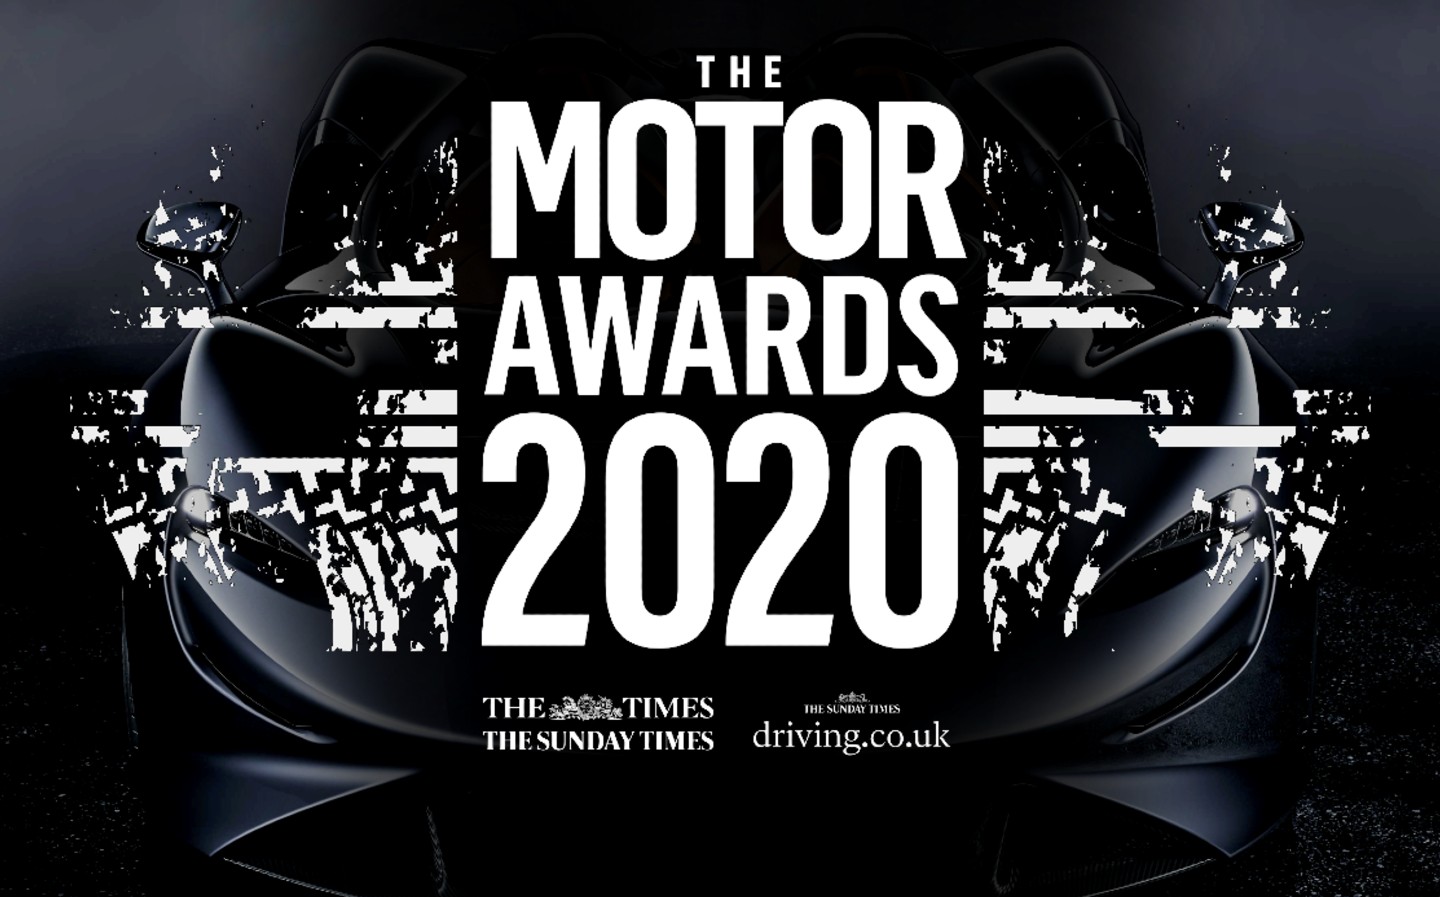 Sunday Times Motor Awards 2020 - vote now and win a holiday competition